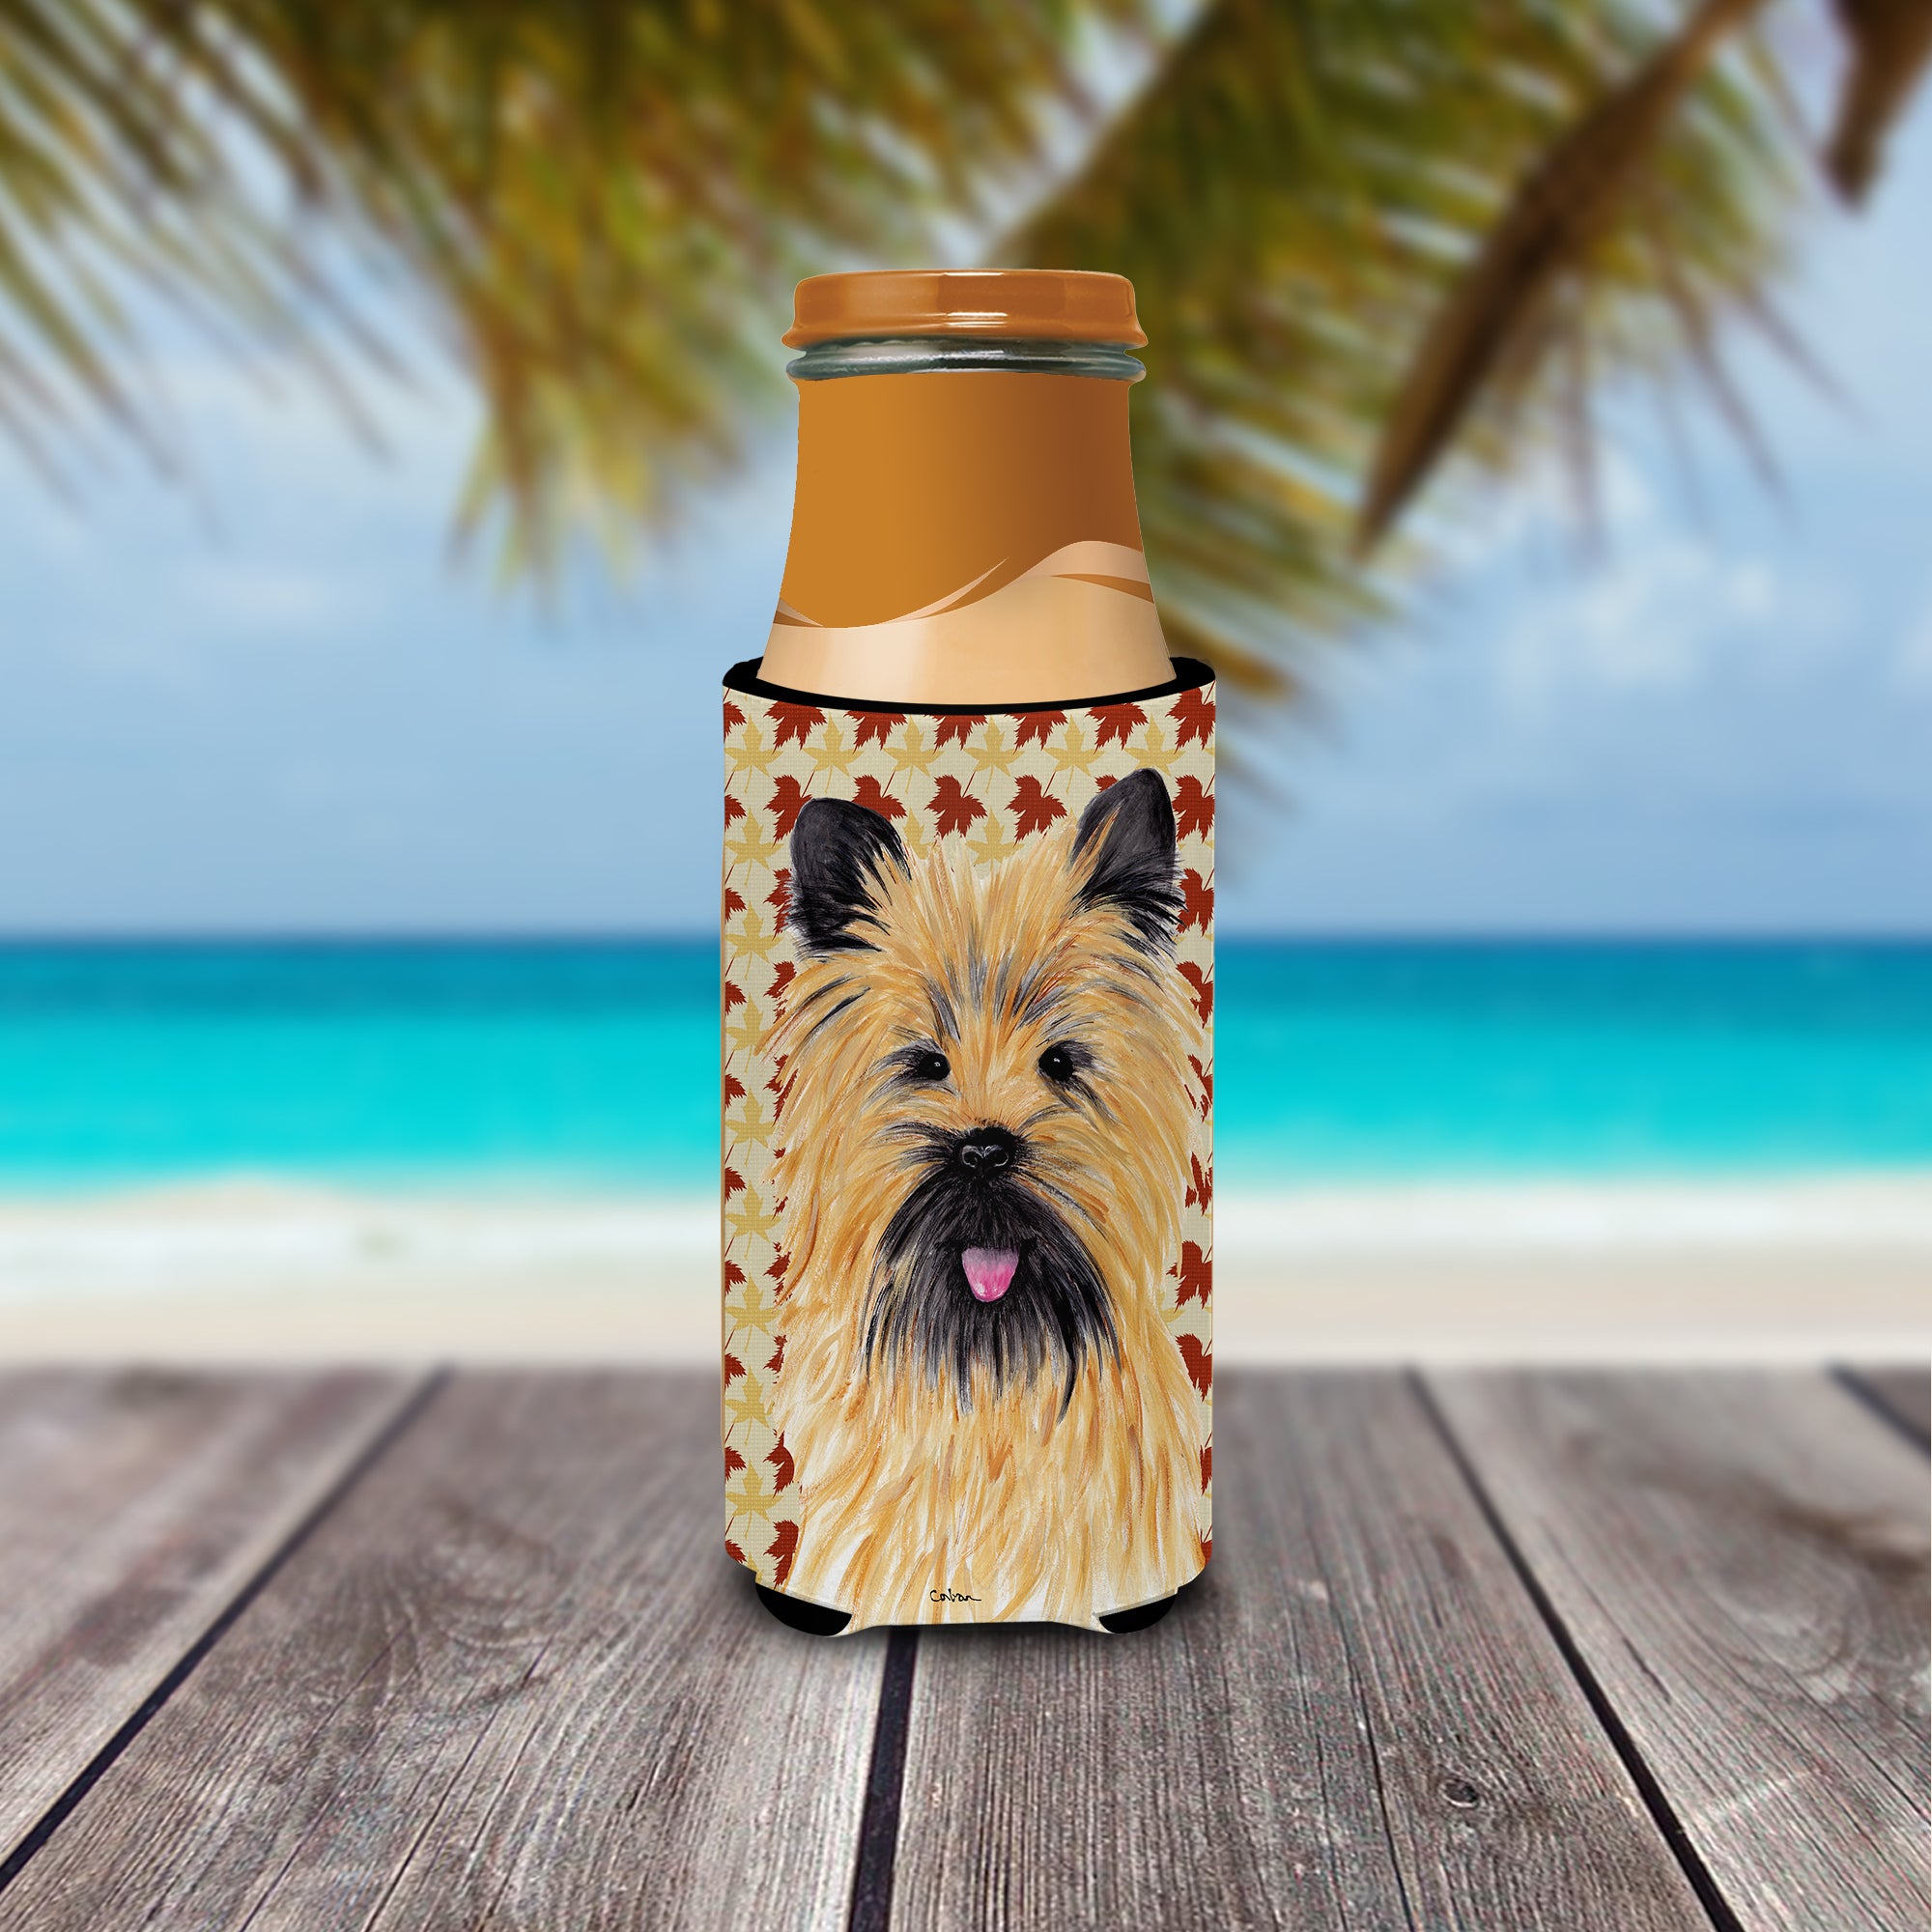 Cairn Terrier Fall Leaves Portrait Ultra Beverage Insulators for slim cans SC9215MUK